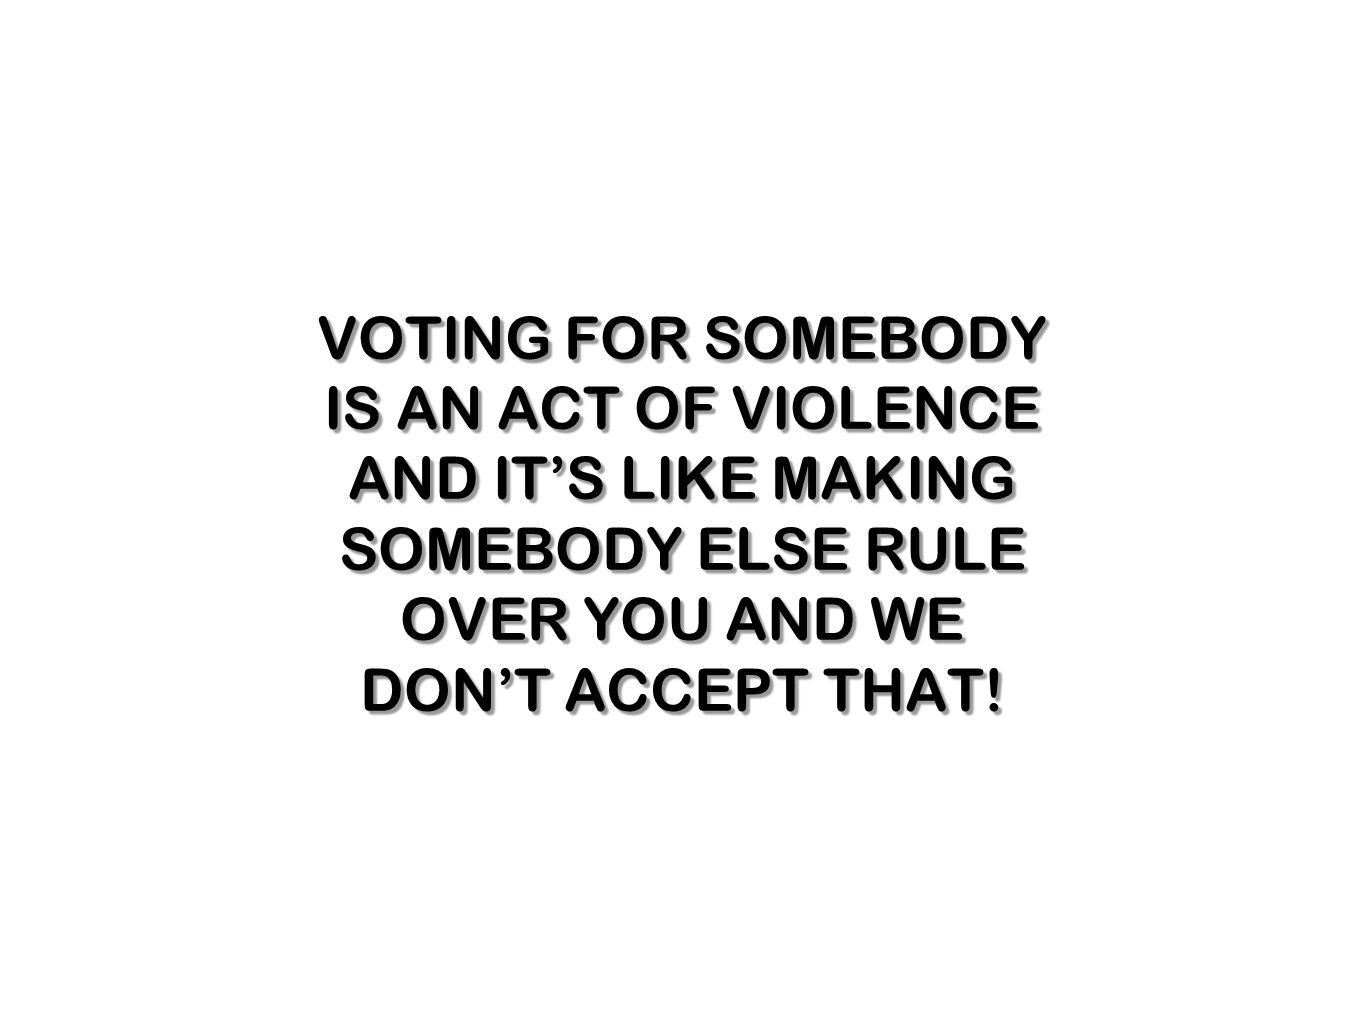 VOTING FOR SOMEBODY IS AN ACT OF VIOLENCE AND IT’S LIKE MAKING SOMEBODY ELSE RULE OVER YOU AND WE DON’T ACCEPT THAT!